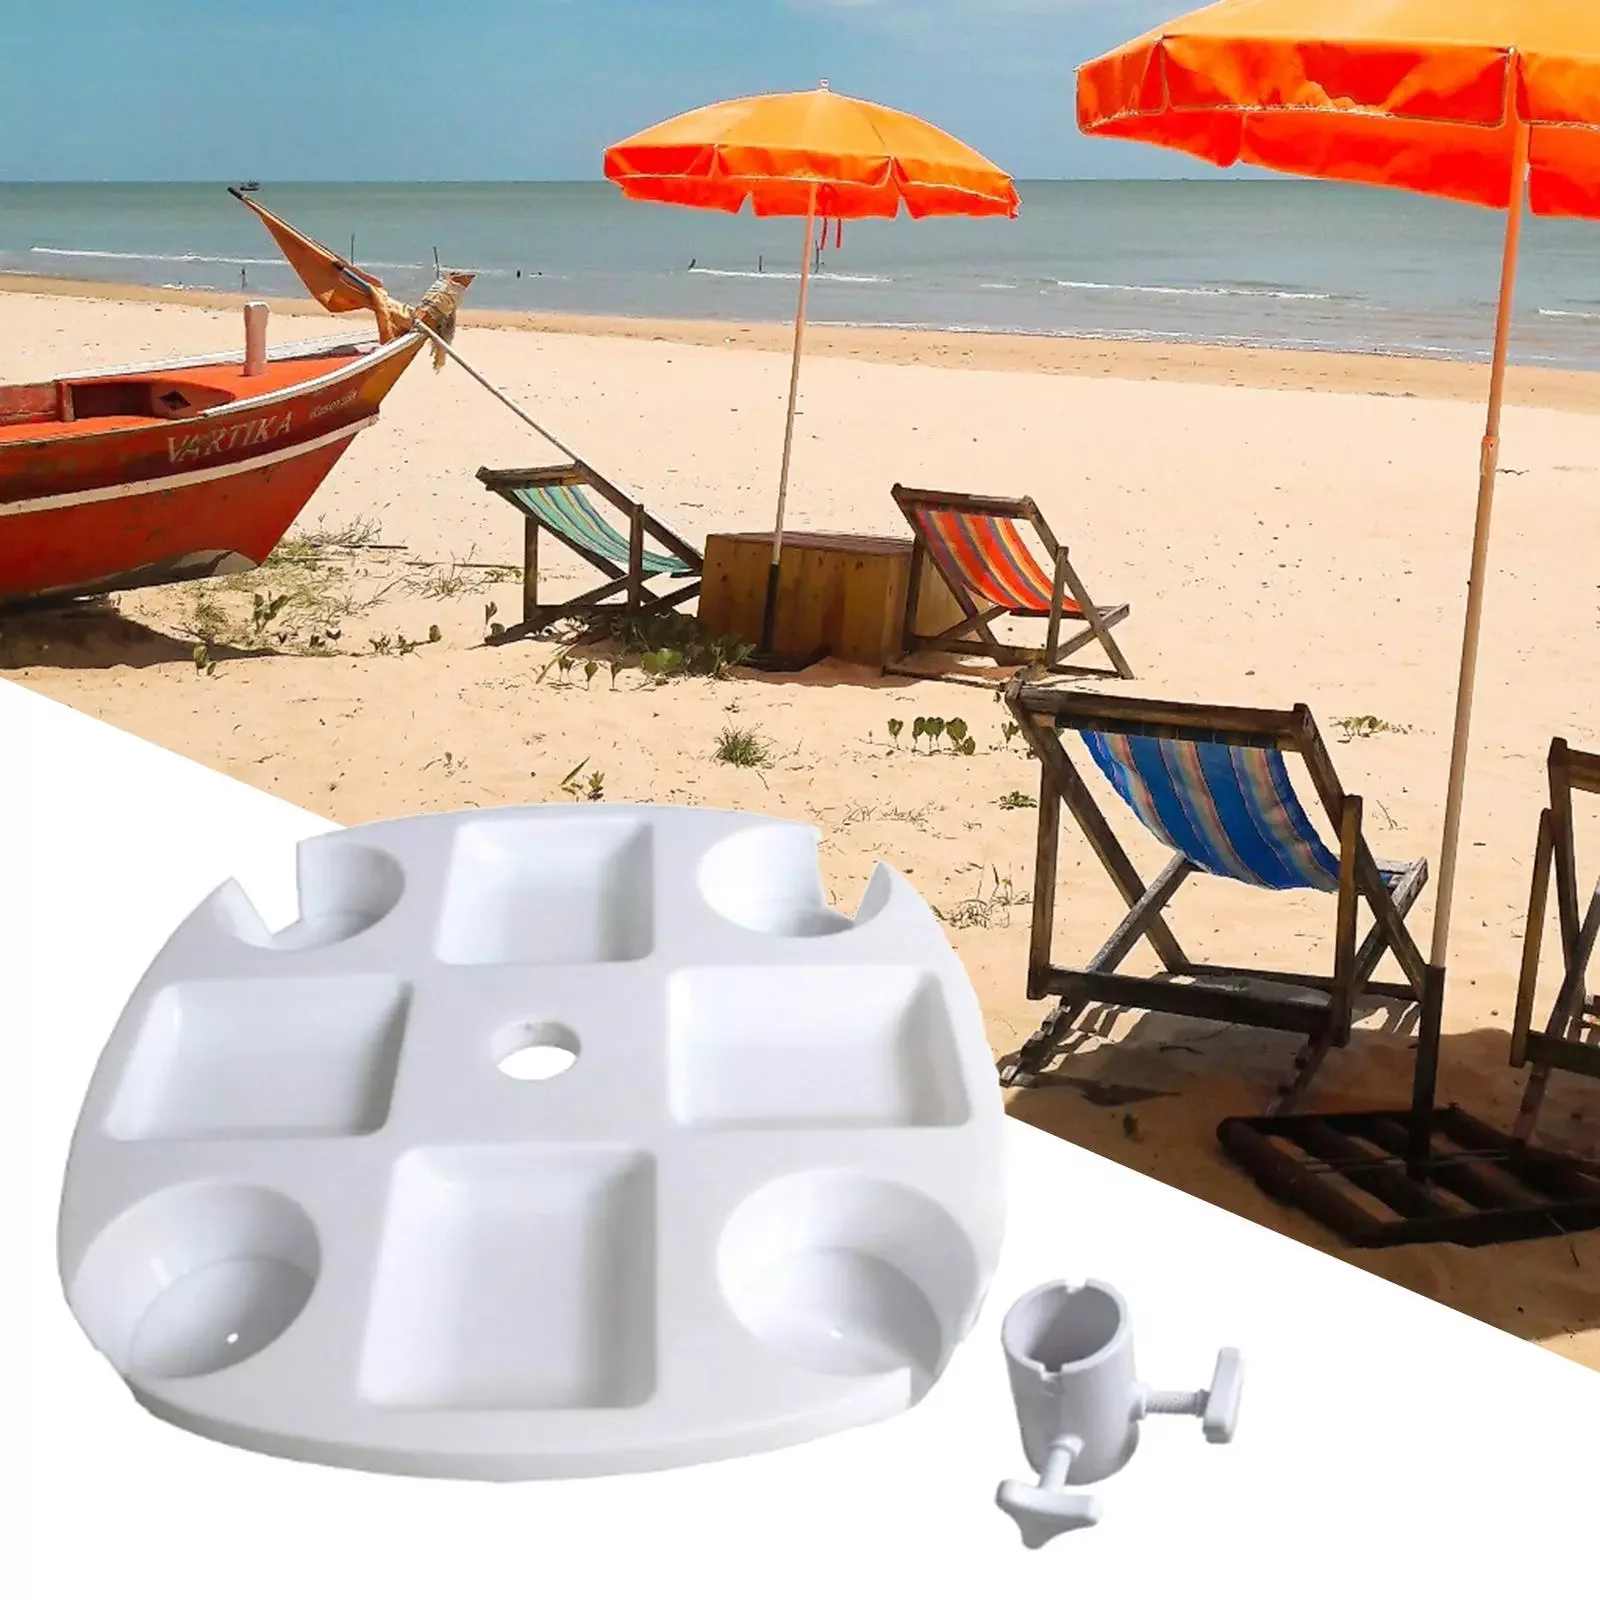 2023NEW Summer Beach Umbrella Table Tray 4 Snack Compartments Outdoor Snack Drink Holder for Beach Swimming Pool Patio Garden